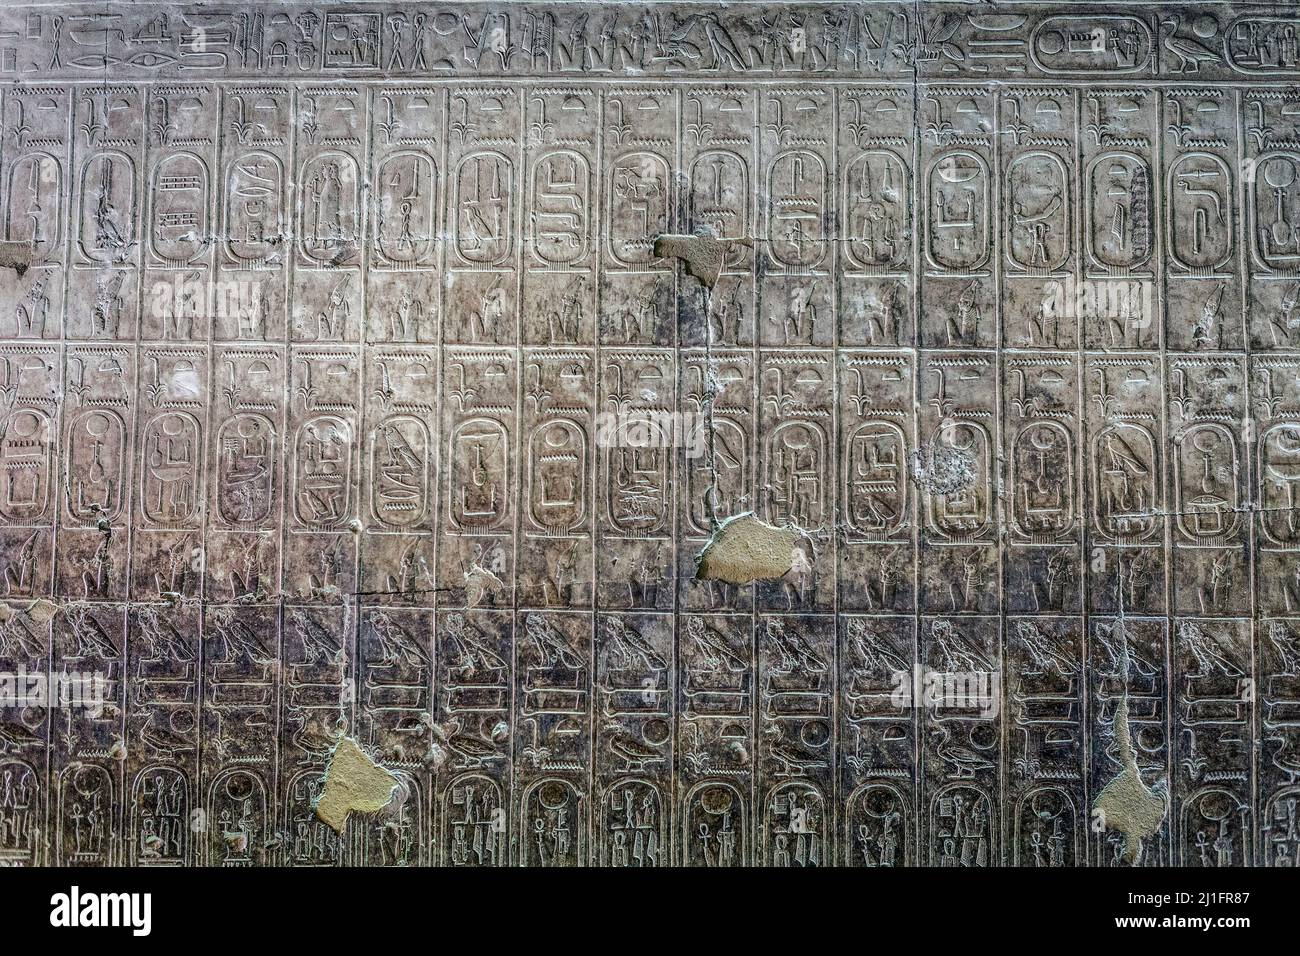 Cartouches from The Pharaoh List, or List of Kings, in the Second Hypostyle Hall at the Great Temple of Abydos, Egypt Stock Photo